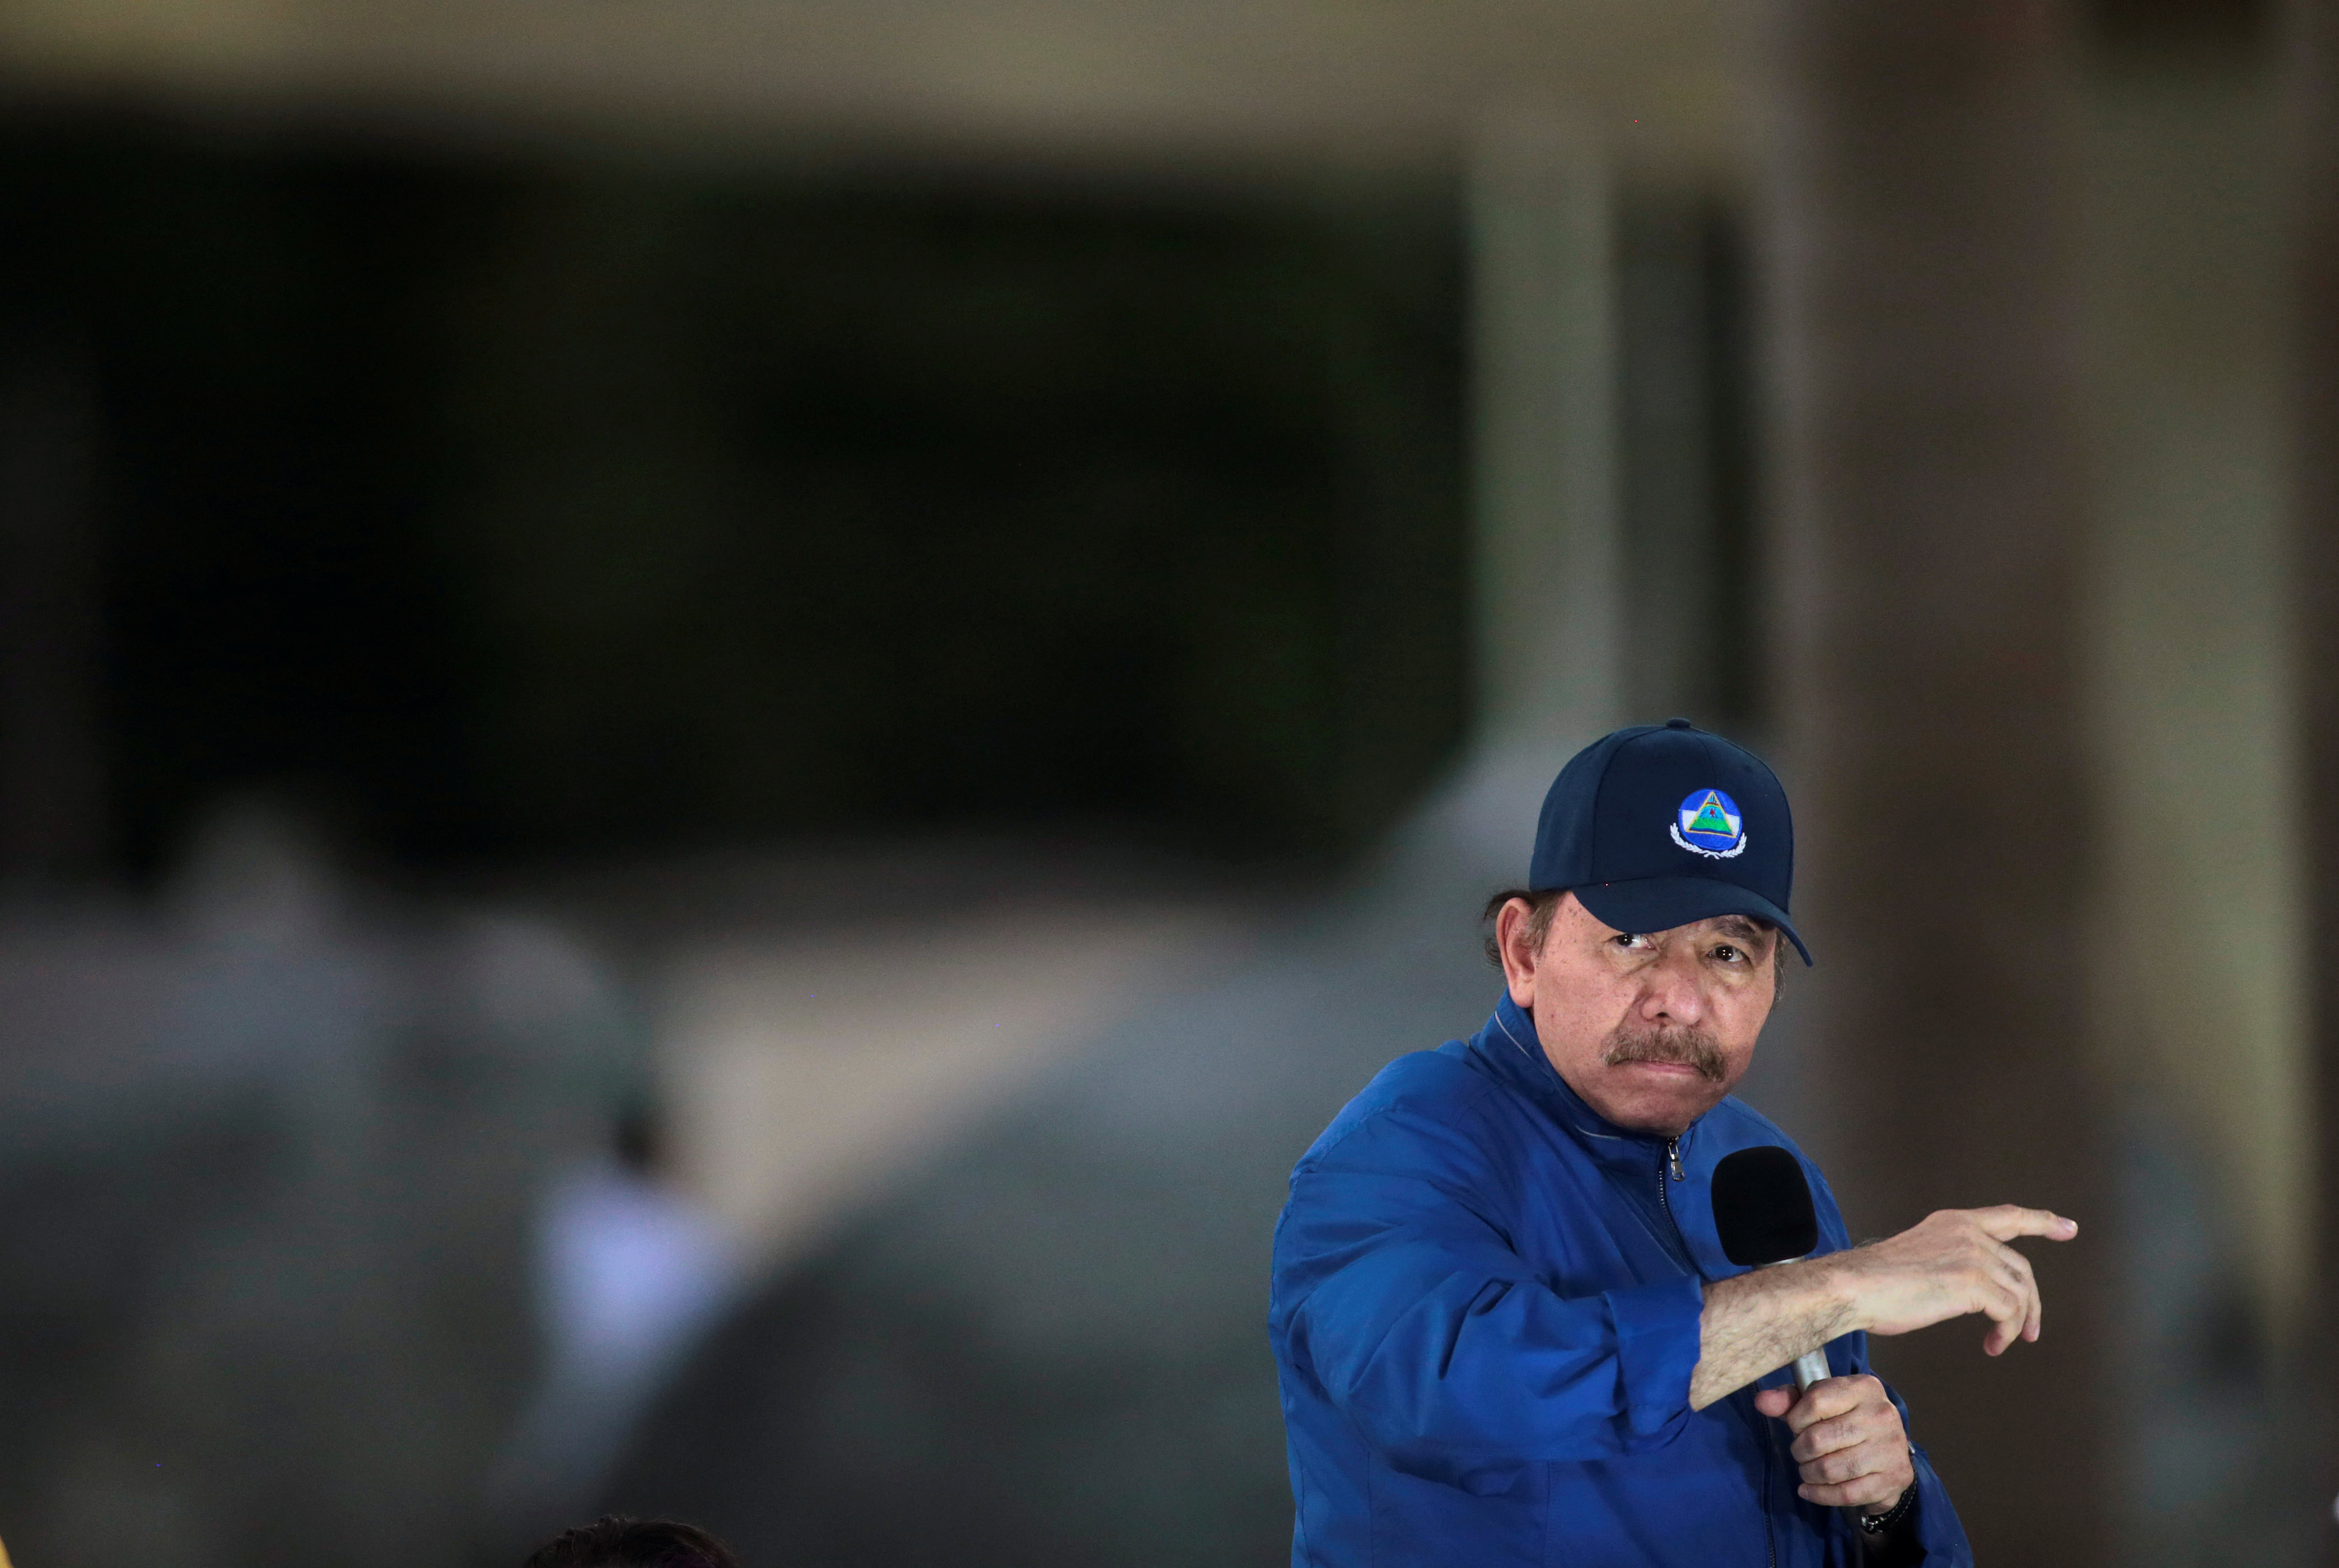 Nicaraguan President Daniel Ortega speaks to supporters during the opening ceremony of a highway overpass in Managua